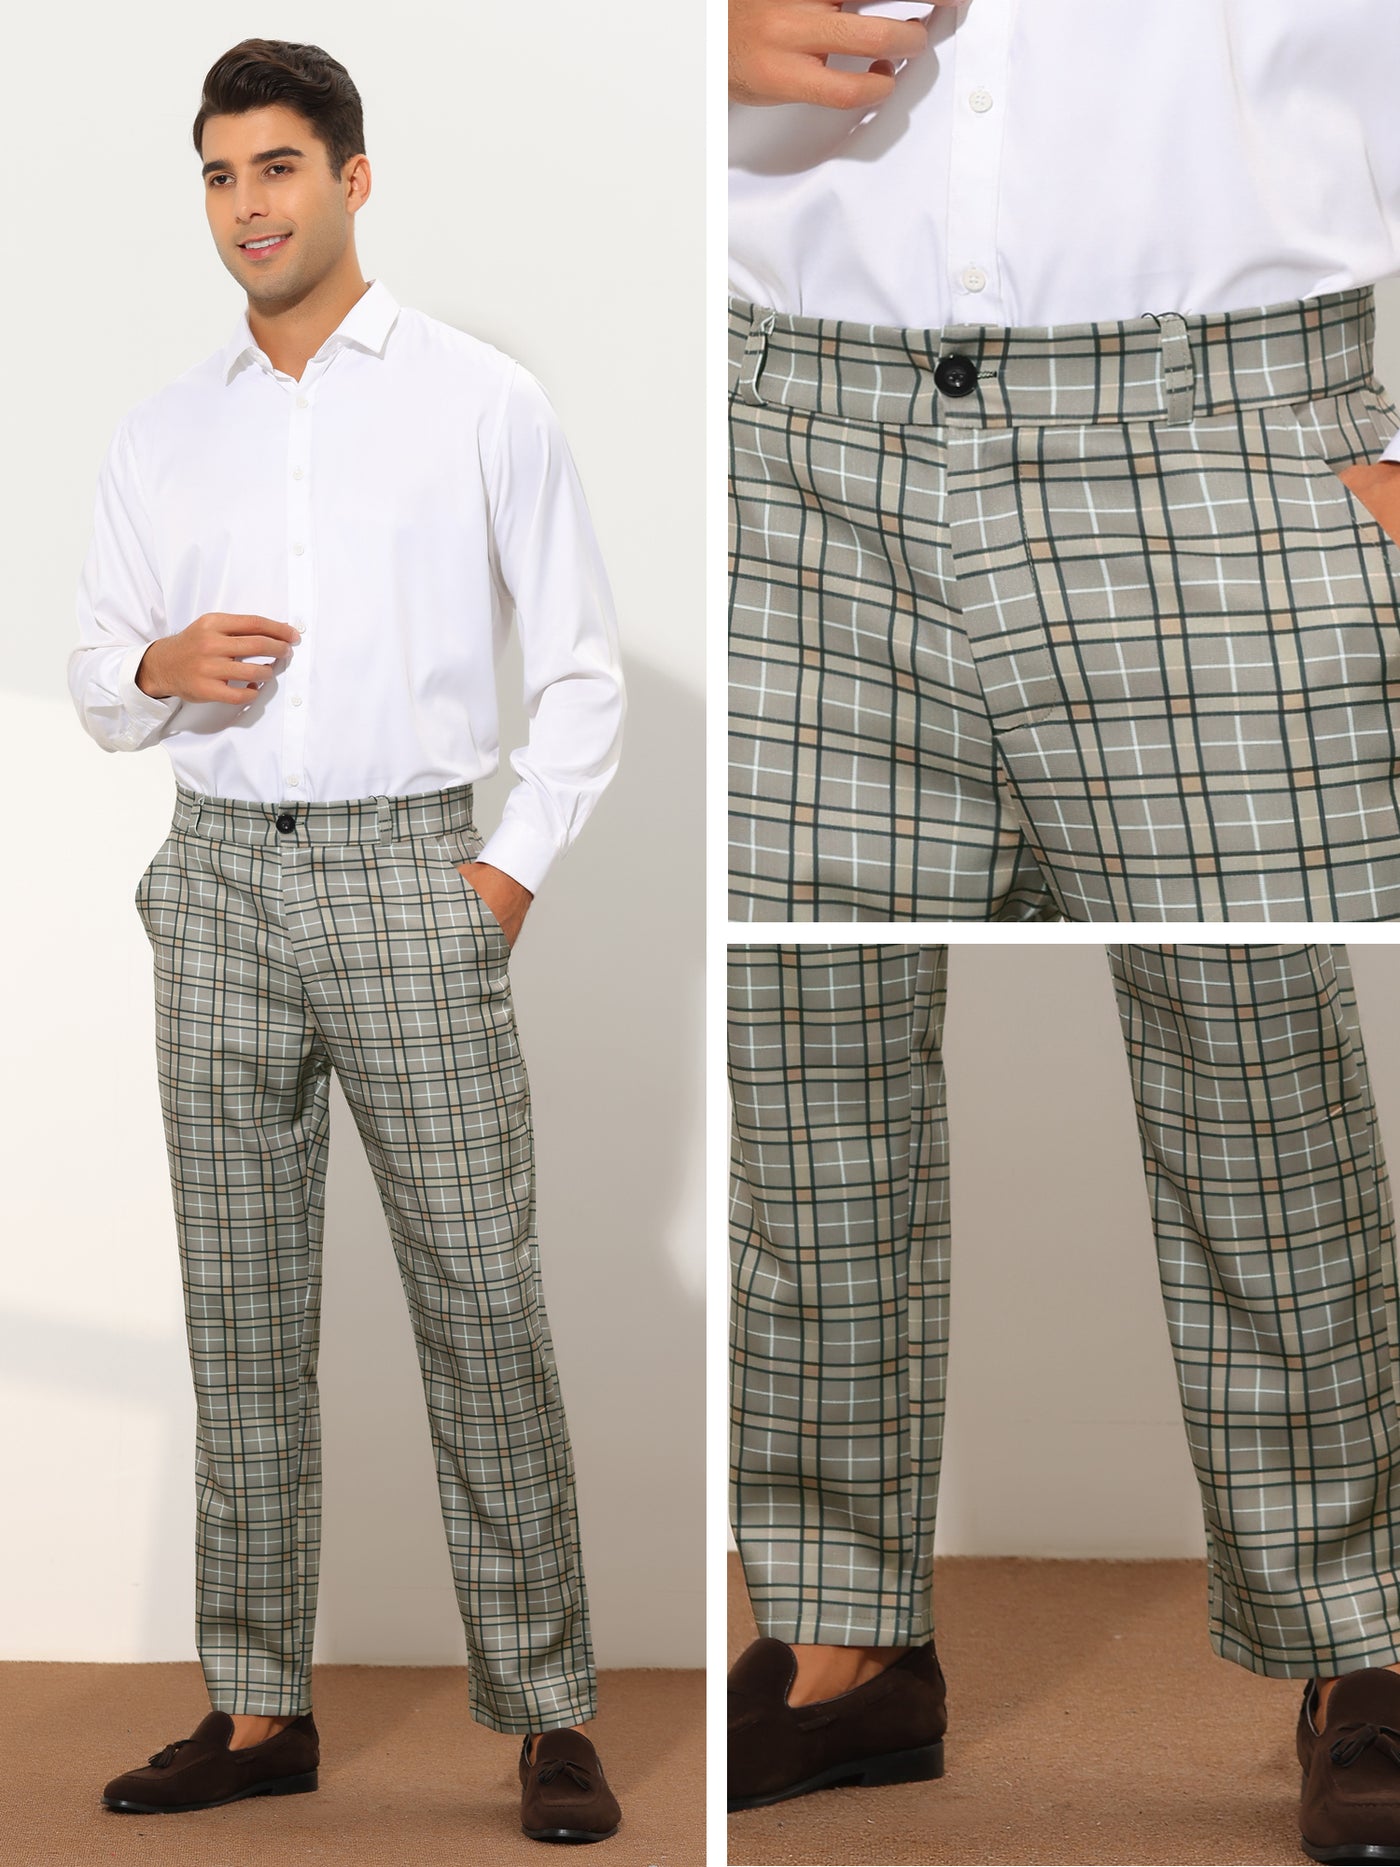 Bublédon Formal Plaid Suit Pants for Men's Straight Fit Casual Checked Pattern Trousers